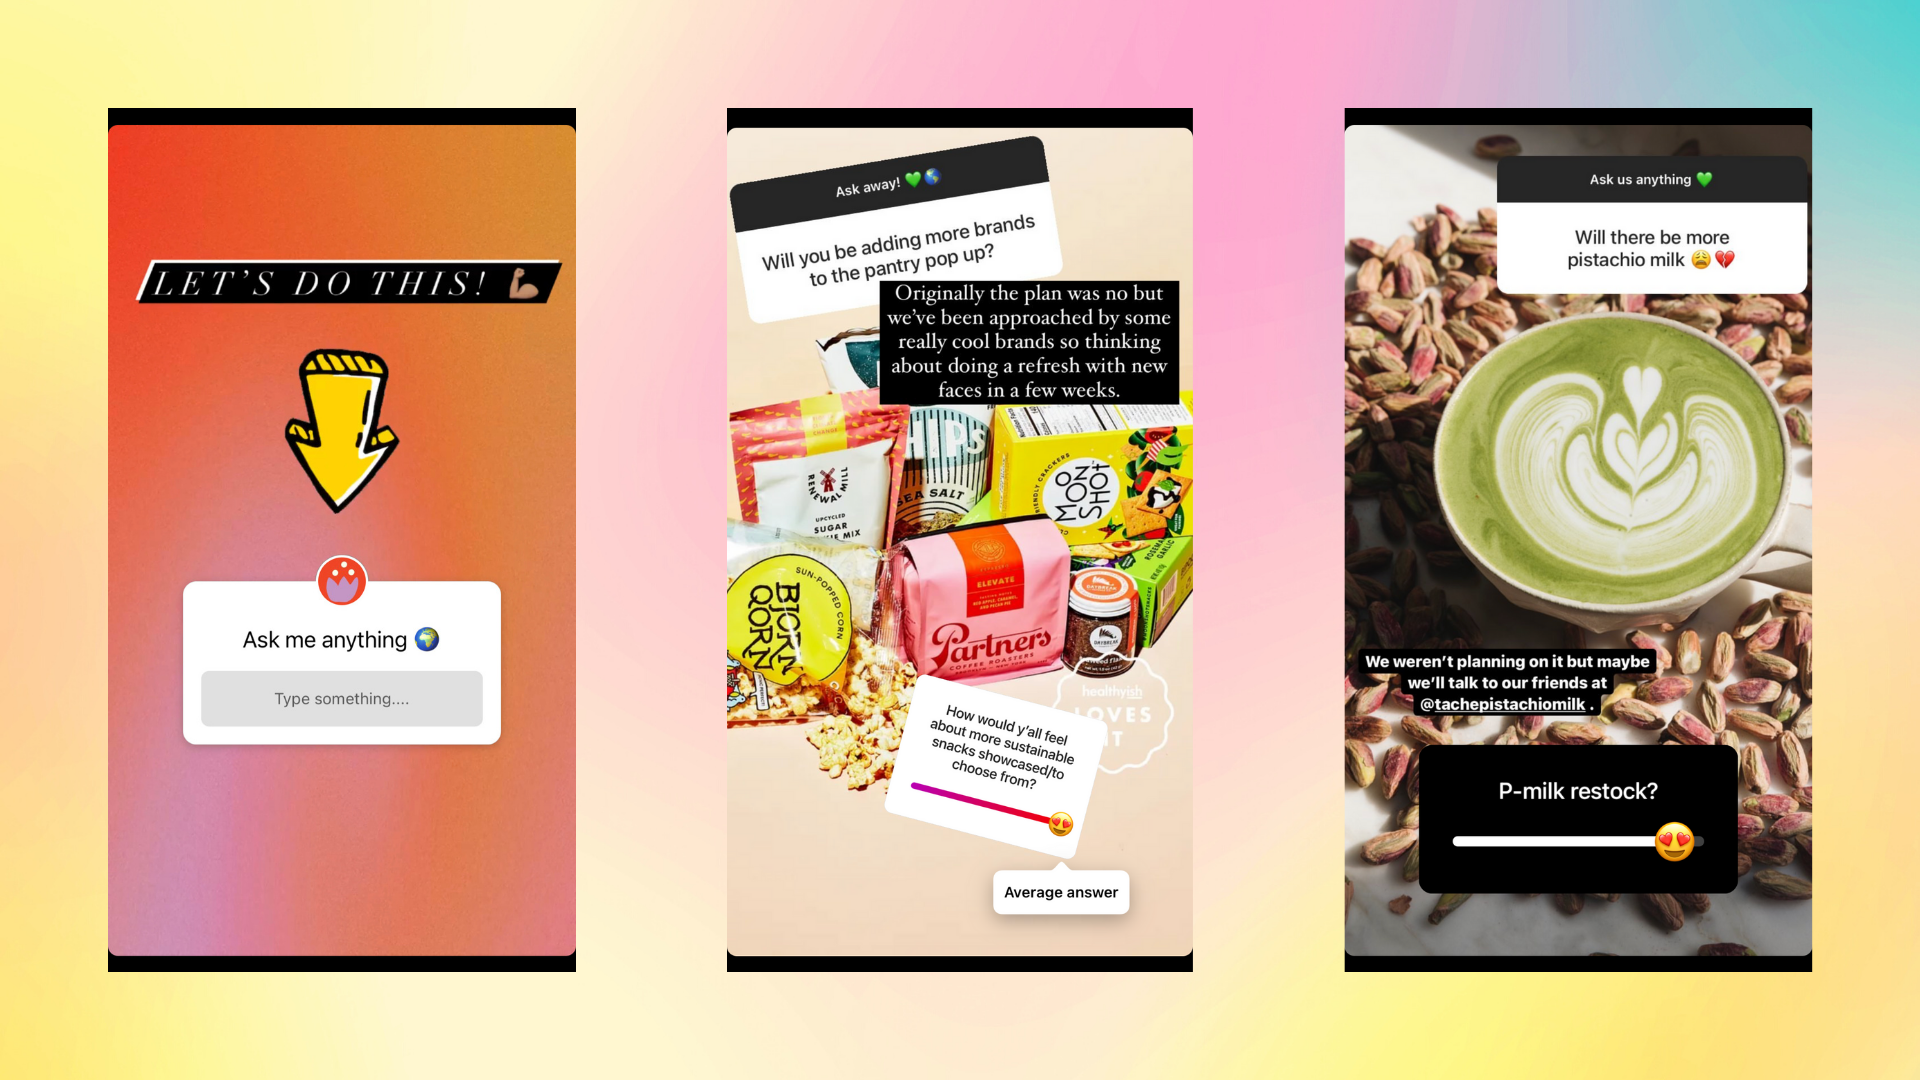 3 images. 1: An organge background with a title 'Let's do this!' and a box requesting 'Ask me anything'. 2: A mixed grouping of snacks, with a text bubble answering a question. 3: A cup of matcha latte with pretty swirls surrounded by coffee beans. Text bubbles as well.  